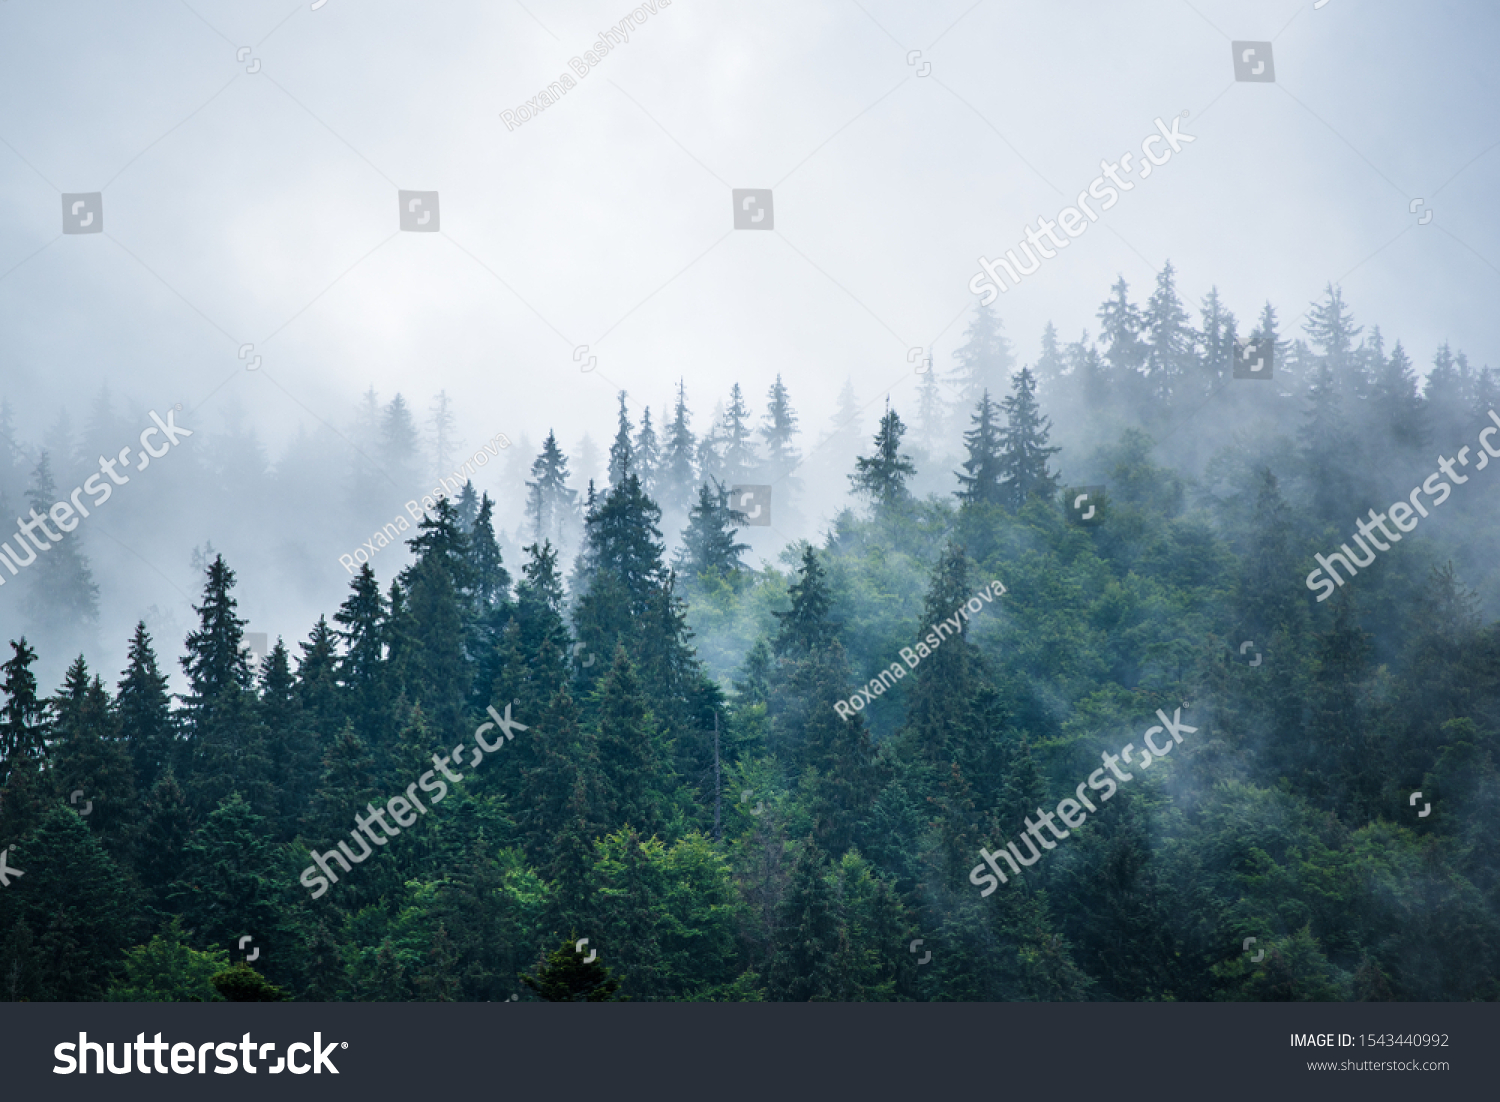 Misty foggy mountain landscape with fir forest and copyspace in vintage retro hipster style #1543440992